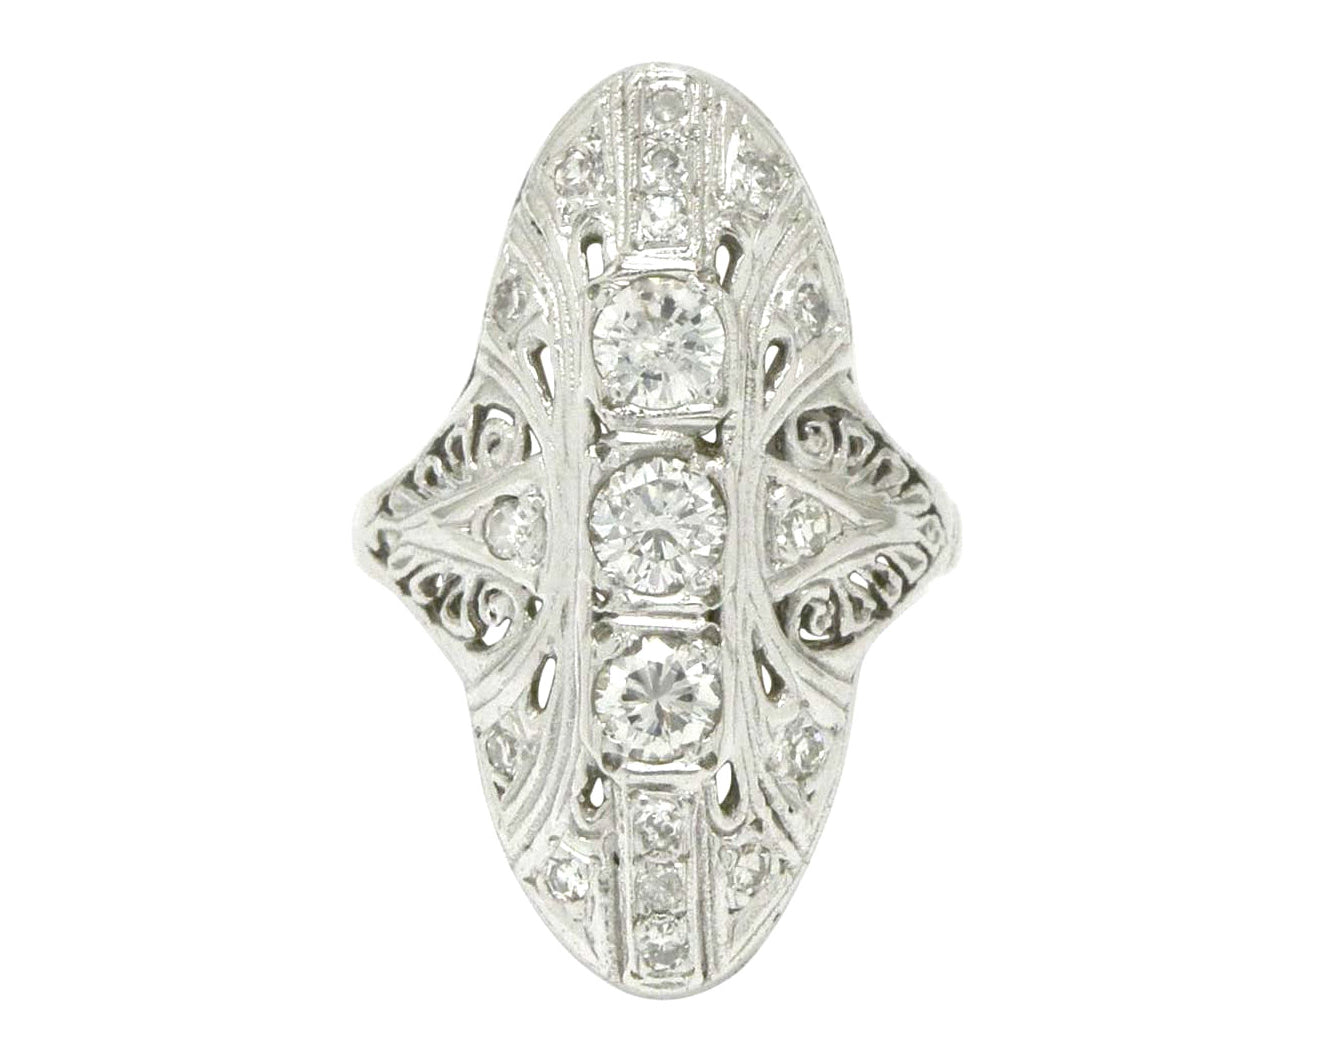 A navette shape ring with diamonds.